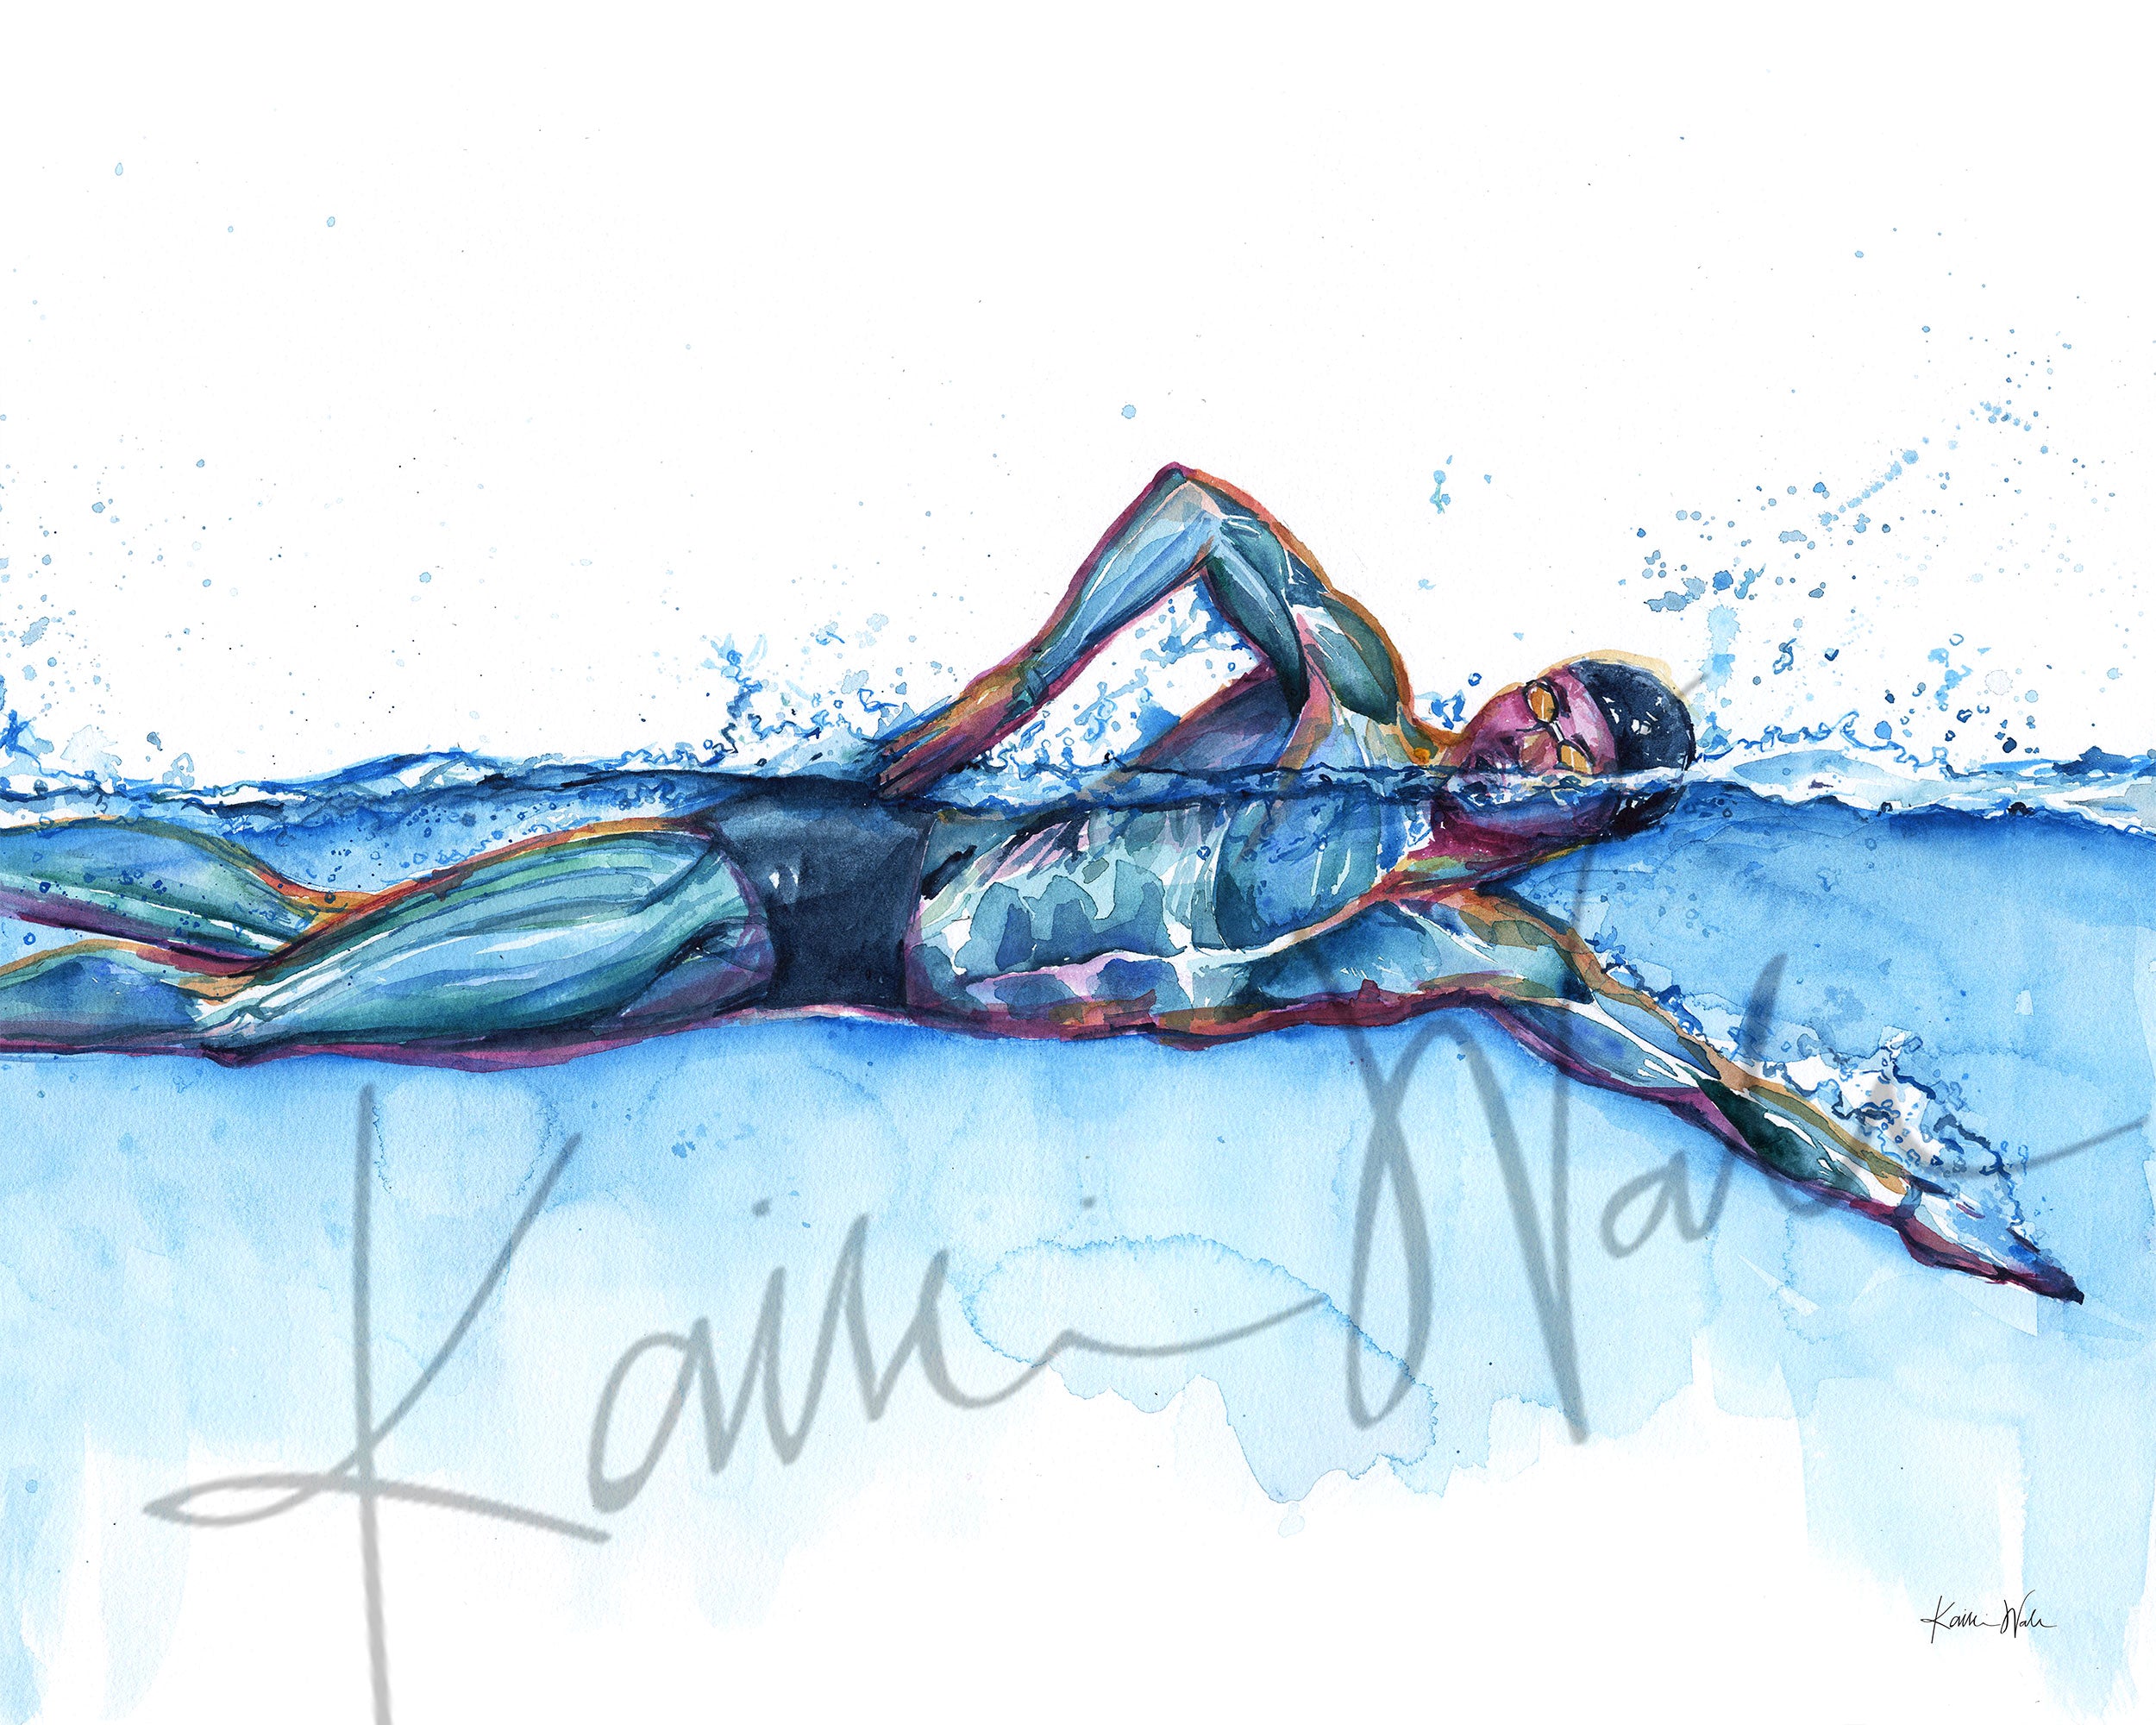 Unframed watercolor painting of a swimmer in mid stroke showing the swimmer’s muscular anatomy.